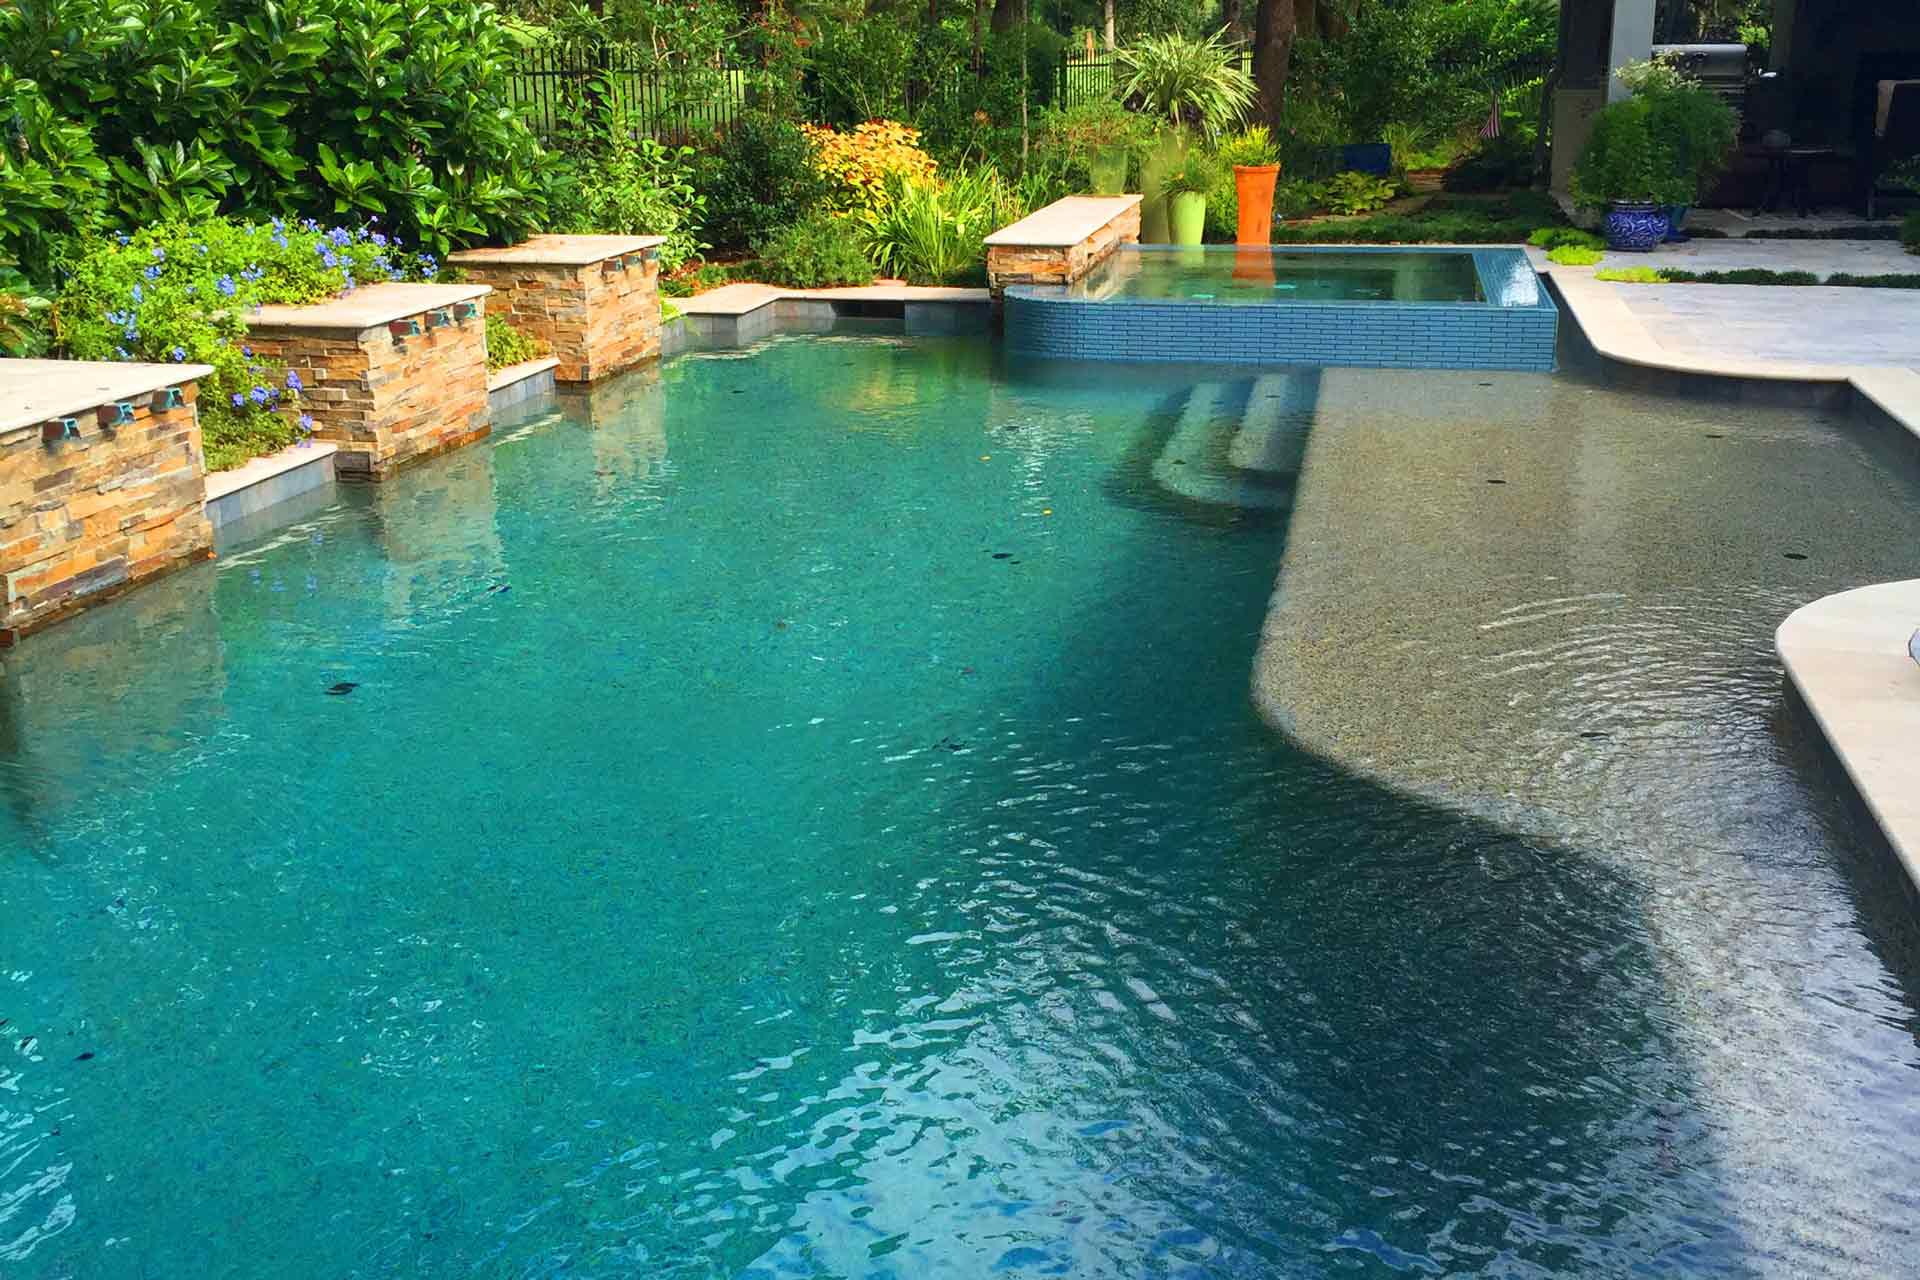 Our team of installers will handle every step of the construction process from excavation down to fi The Pool Whisperer Spring (832)515-5774